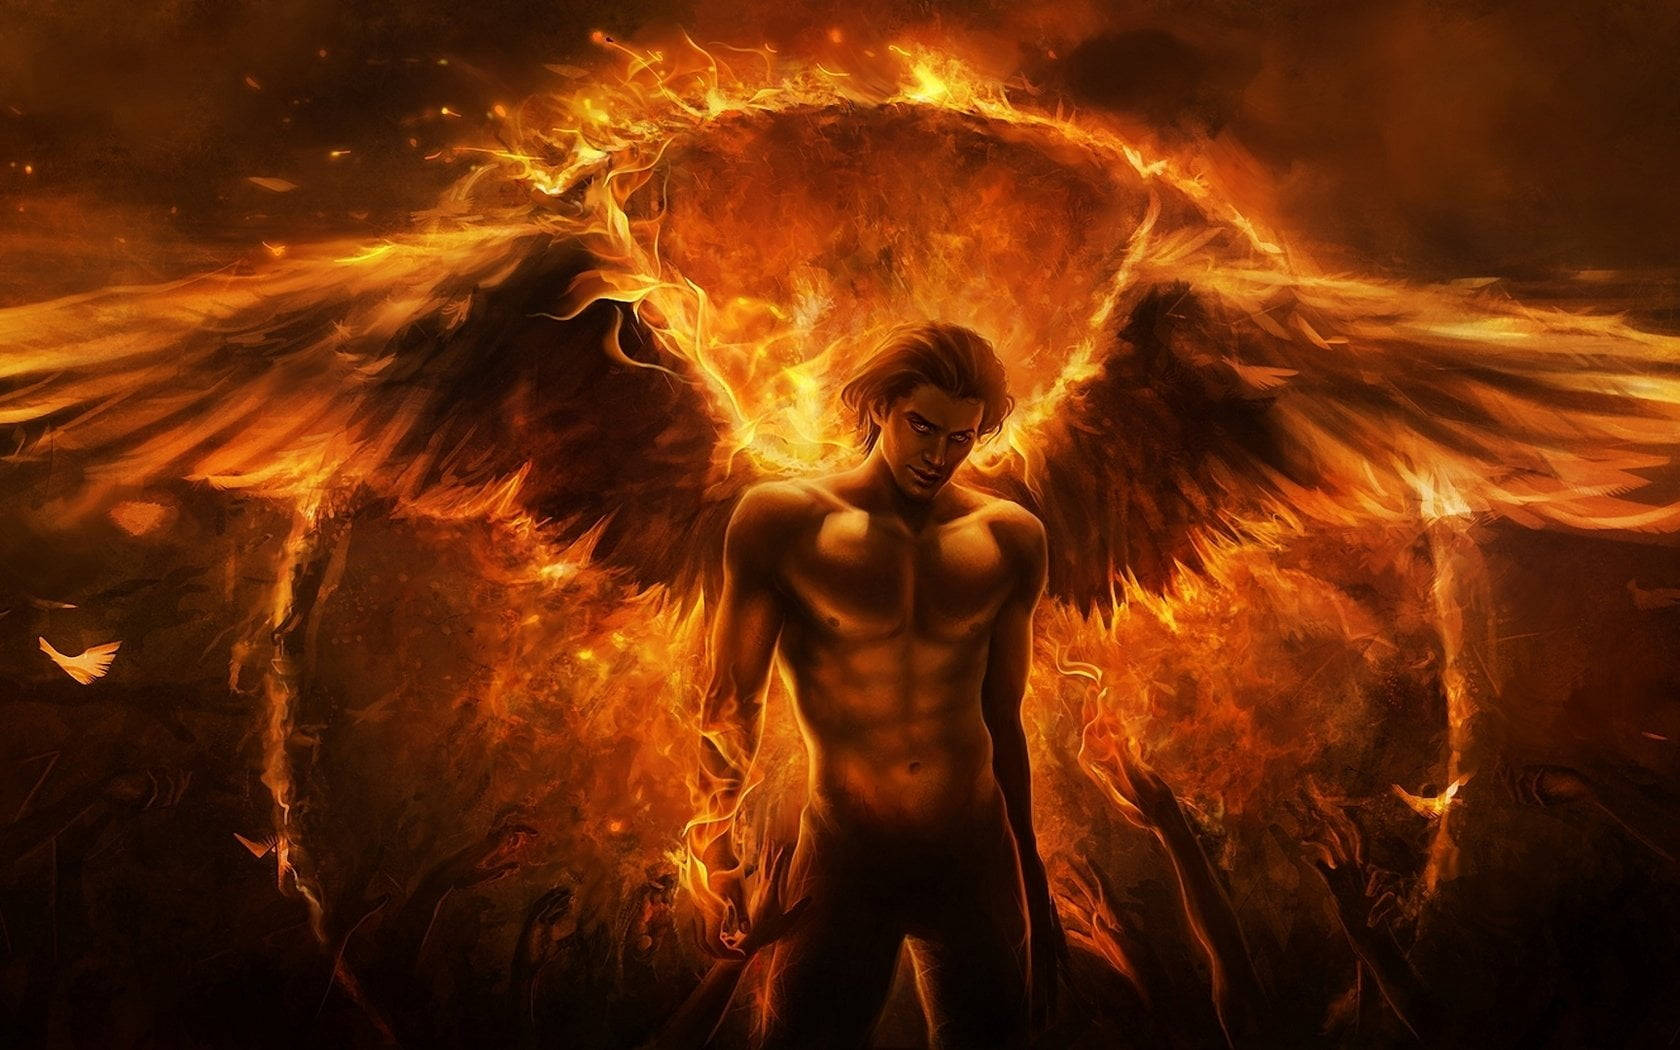 An Angel With Wings In The Middle Of A Fire Wallpaper